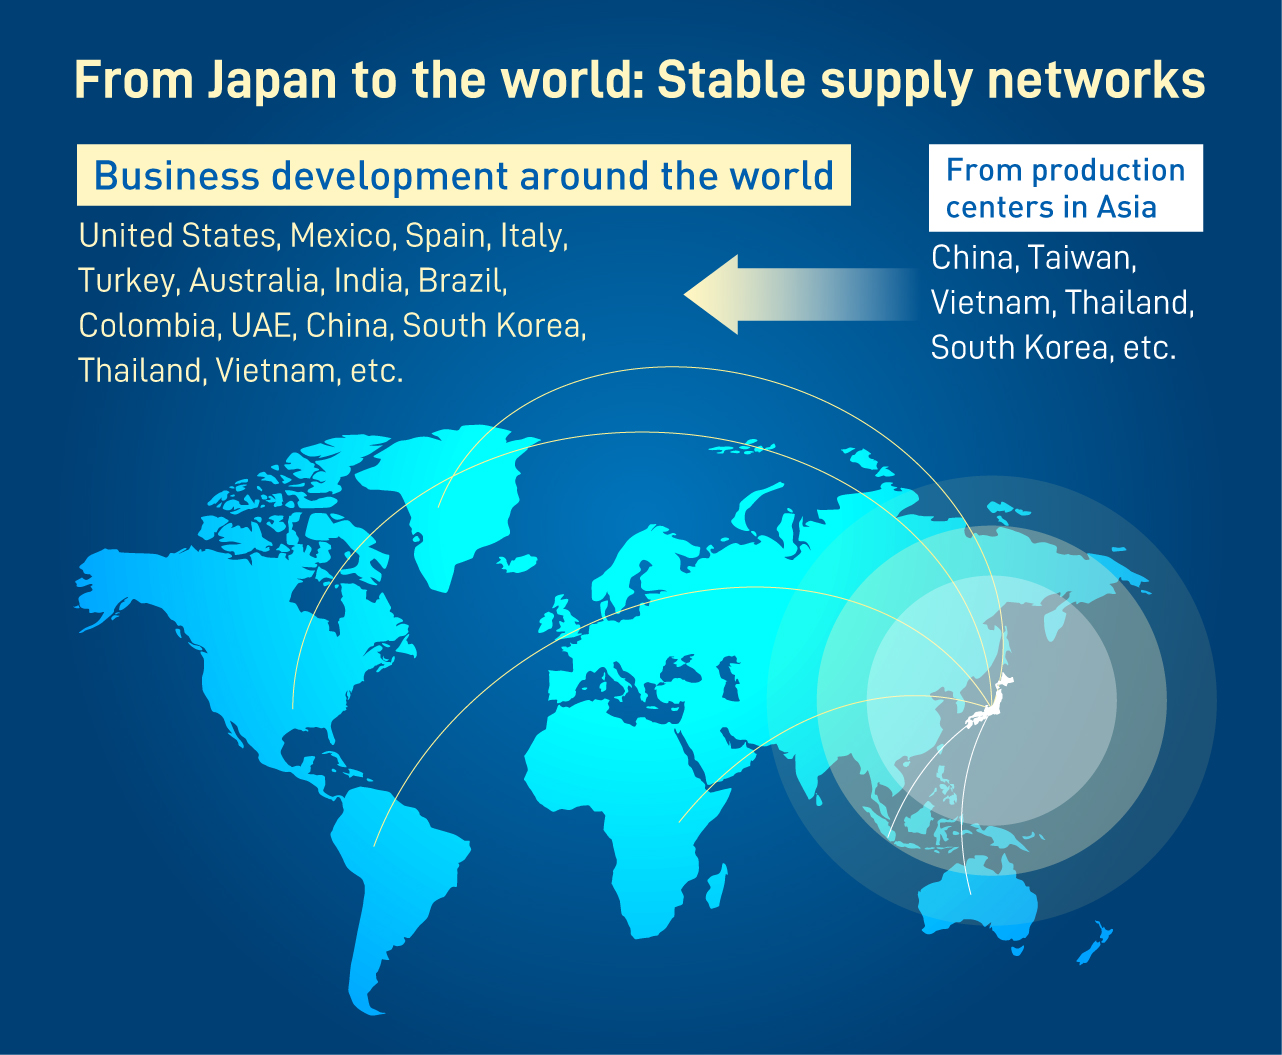 From Japan to the world | Stable supply networks